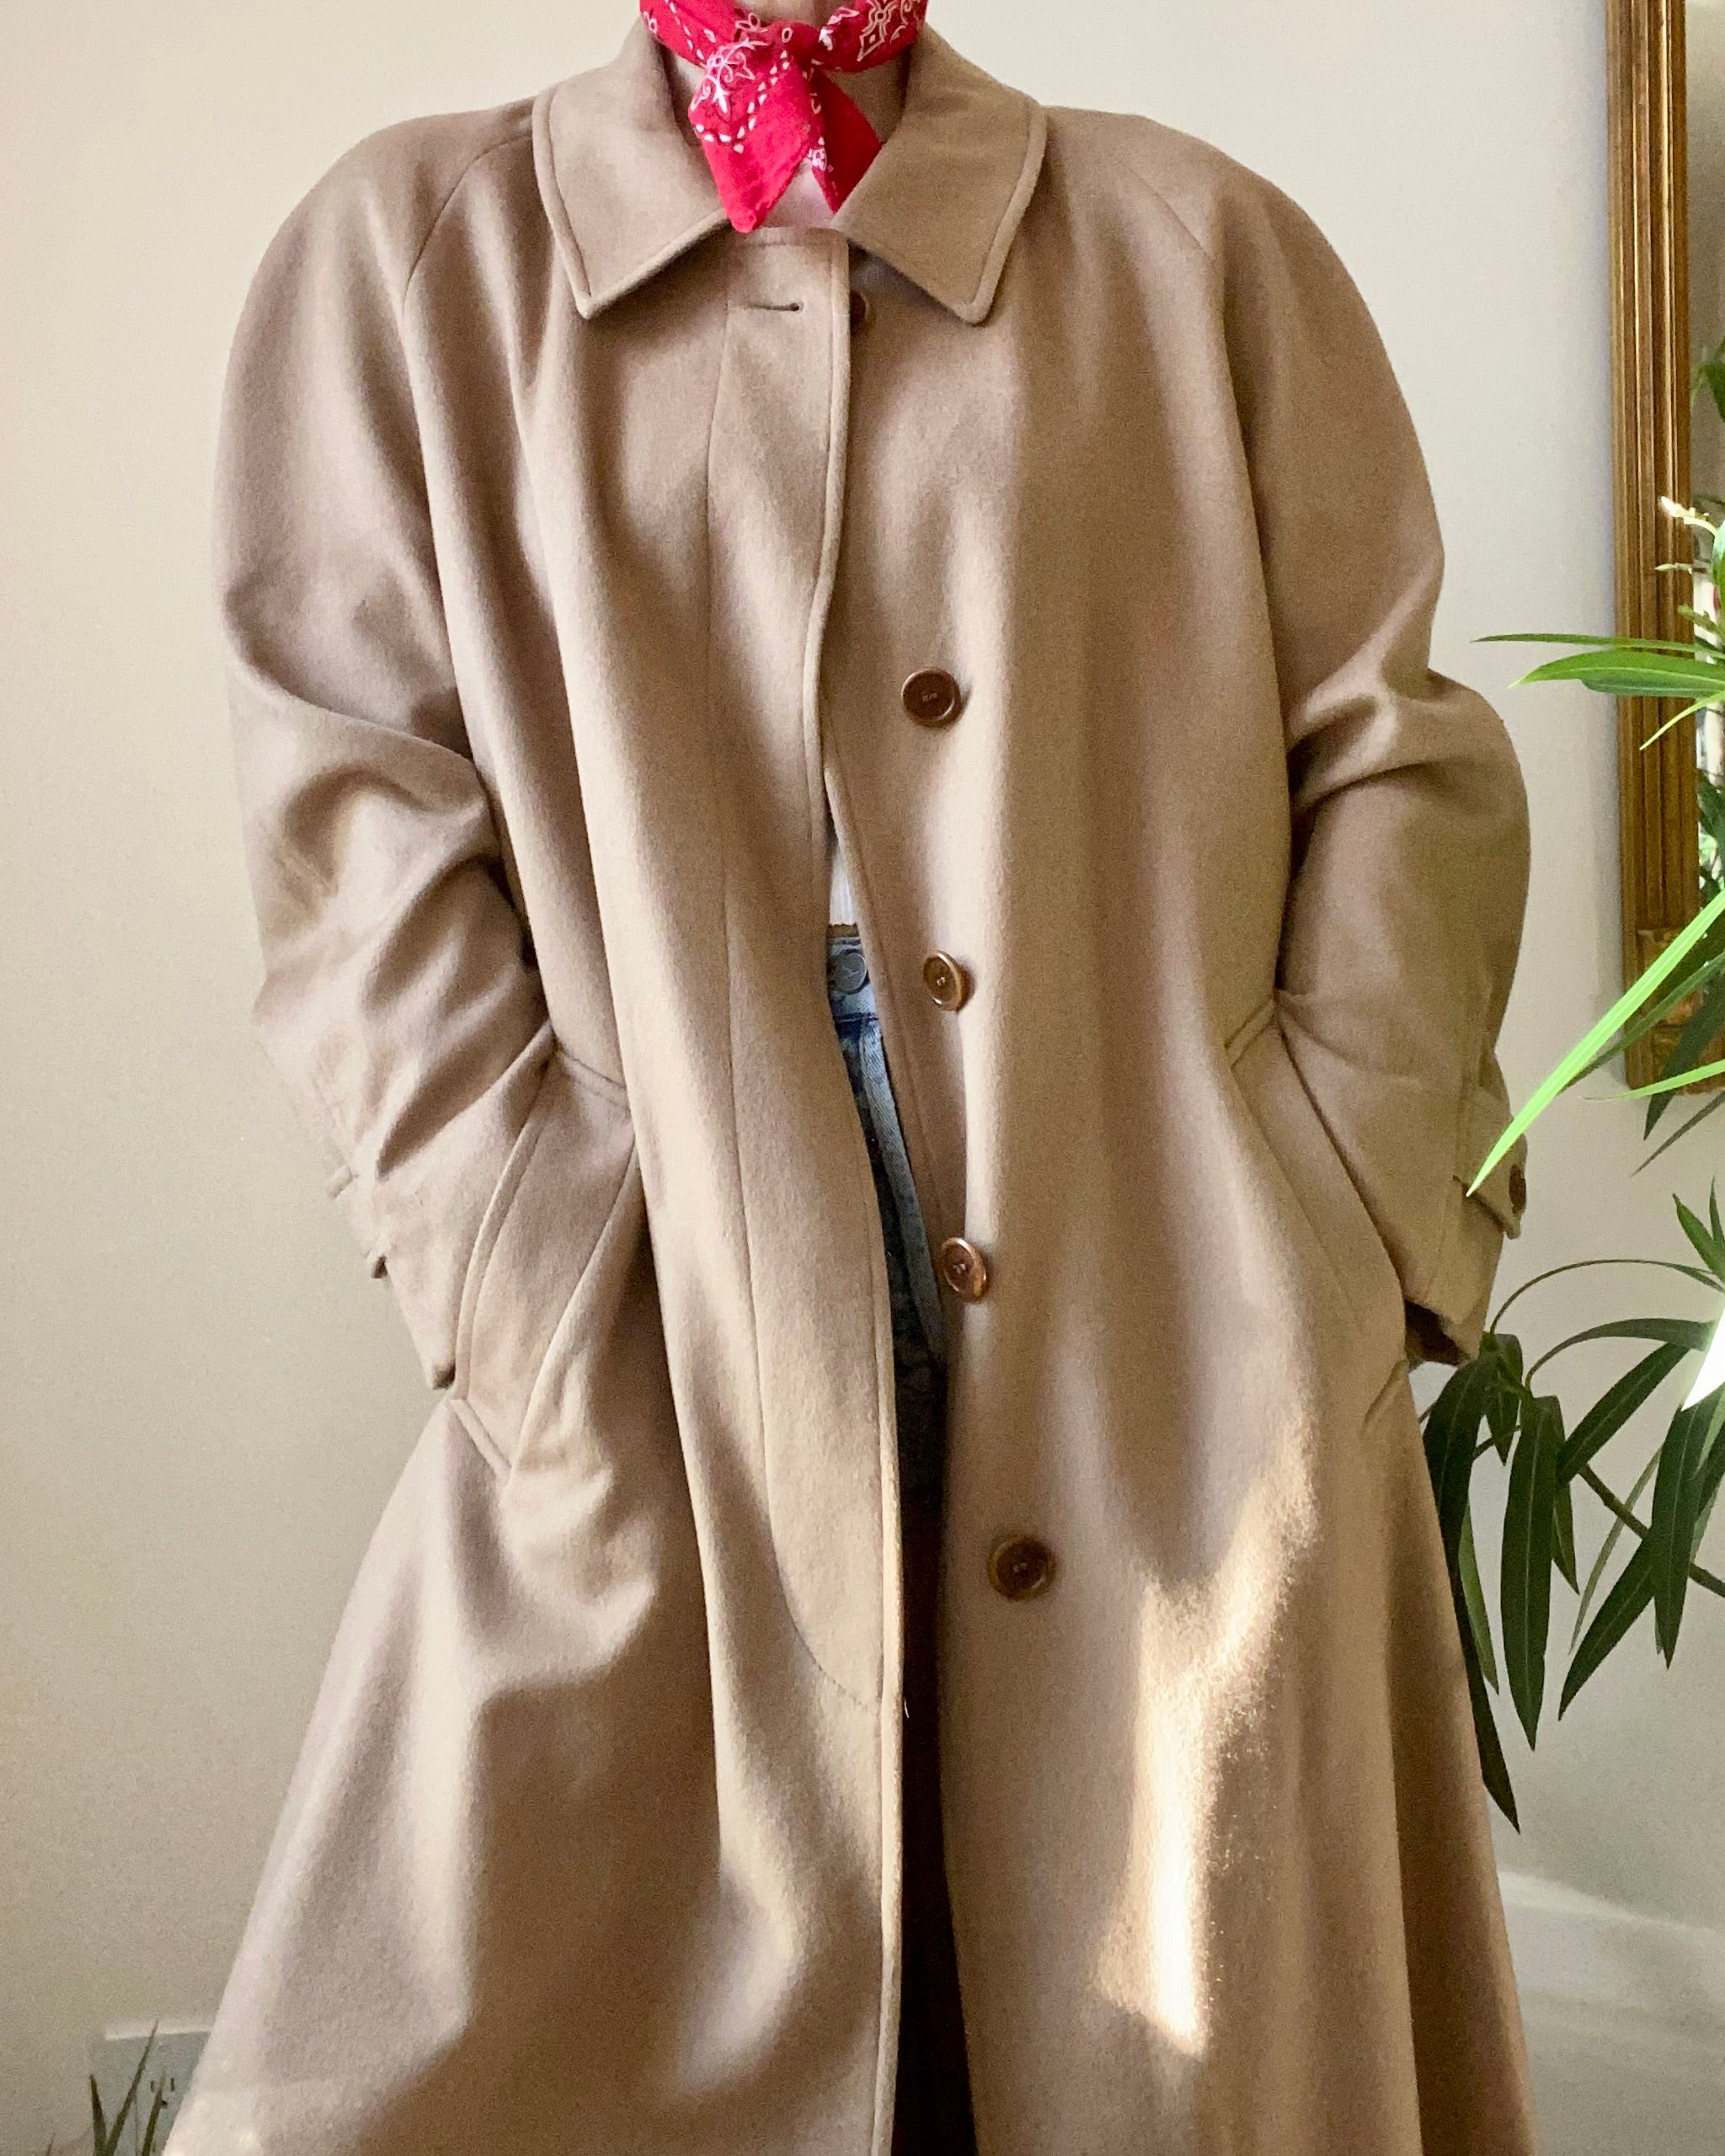 Vintage 1990s 100% Pure Cashmere Camel Lightweight Coat L Made in Italy